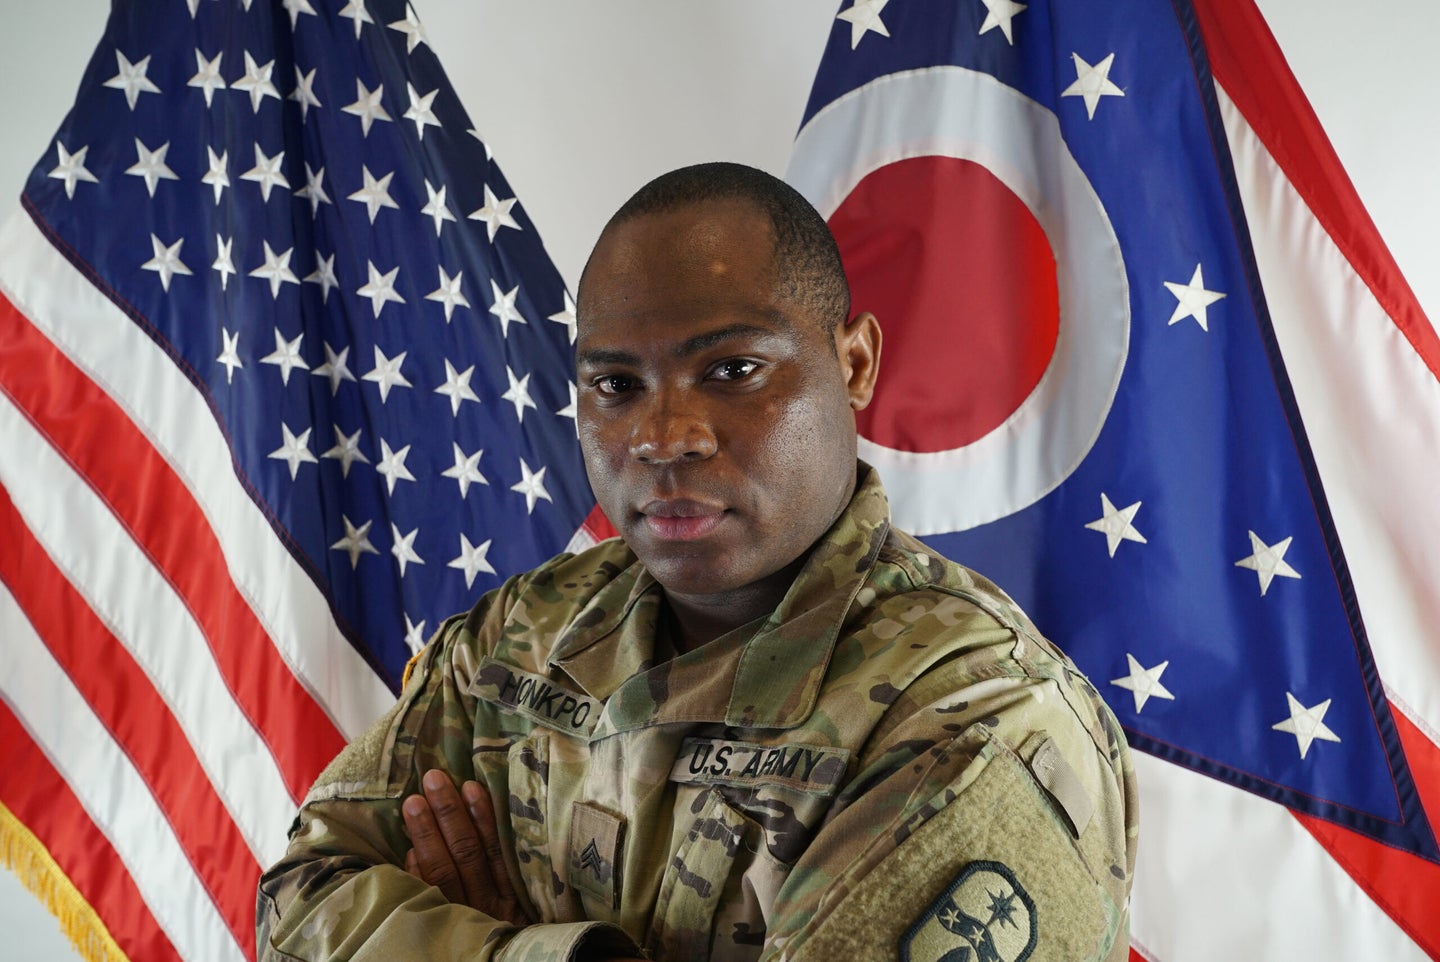 Sgt. Kouami Honkpo, an incentives specialist in the Ohio National Guard Education and Incentives Office, poses for a photo Feb. 24, 2020, at the Maj. Gen. Robert S. Beightler Armory in Columbus, Ohio. Although he has not yet deployed during his military career, Honkpo, who grew up in Togo, West Africa, said one of his motivations for joining the U.S. military was for the opportunity to help spread democracy and freedom throughout the world.